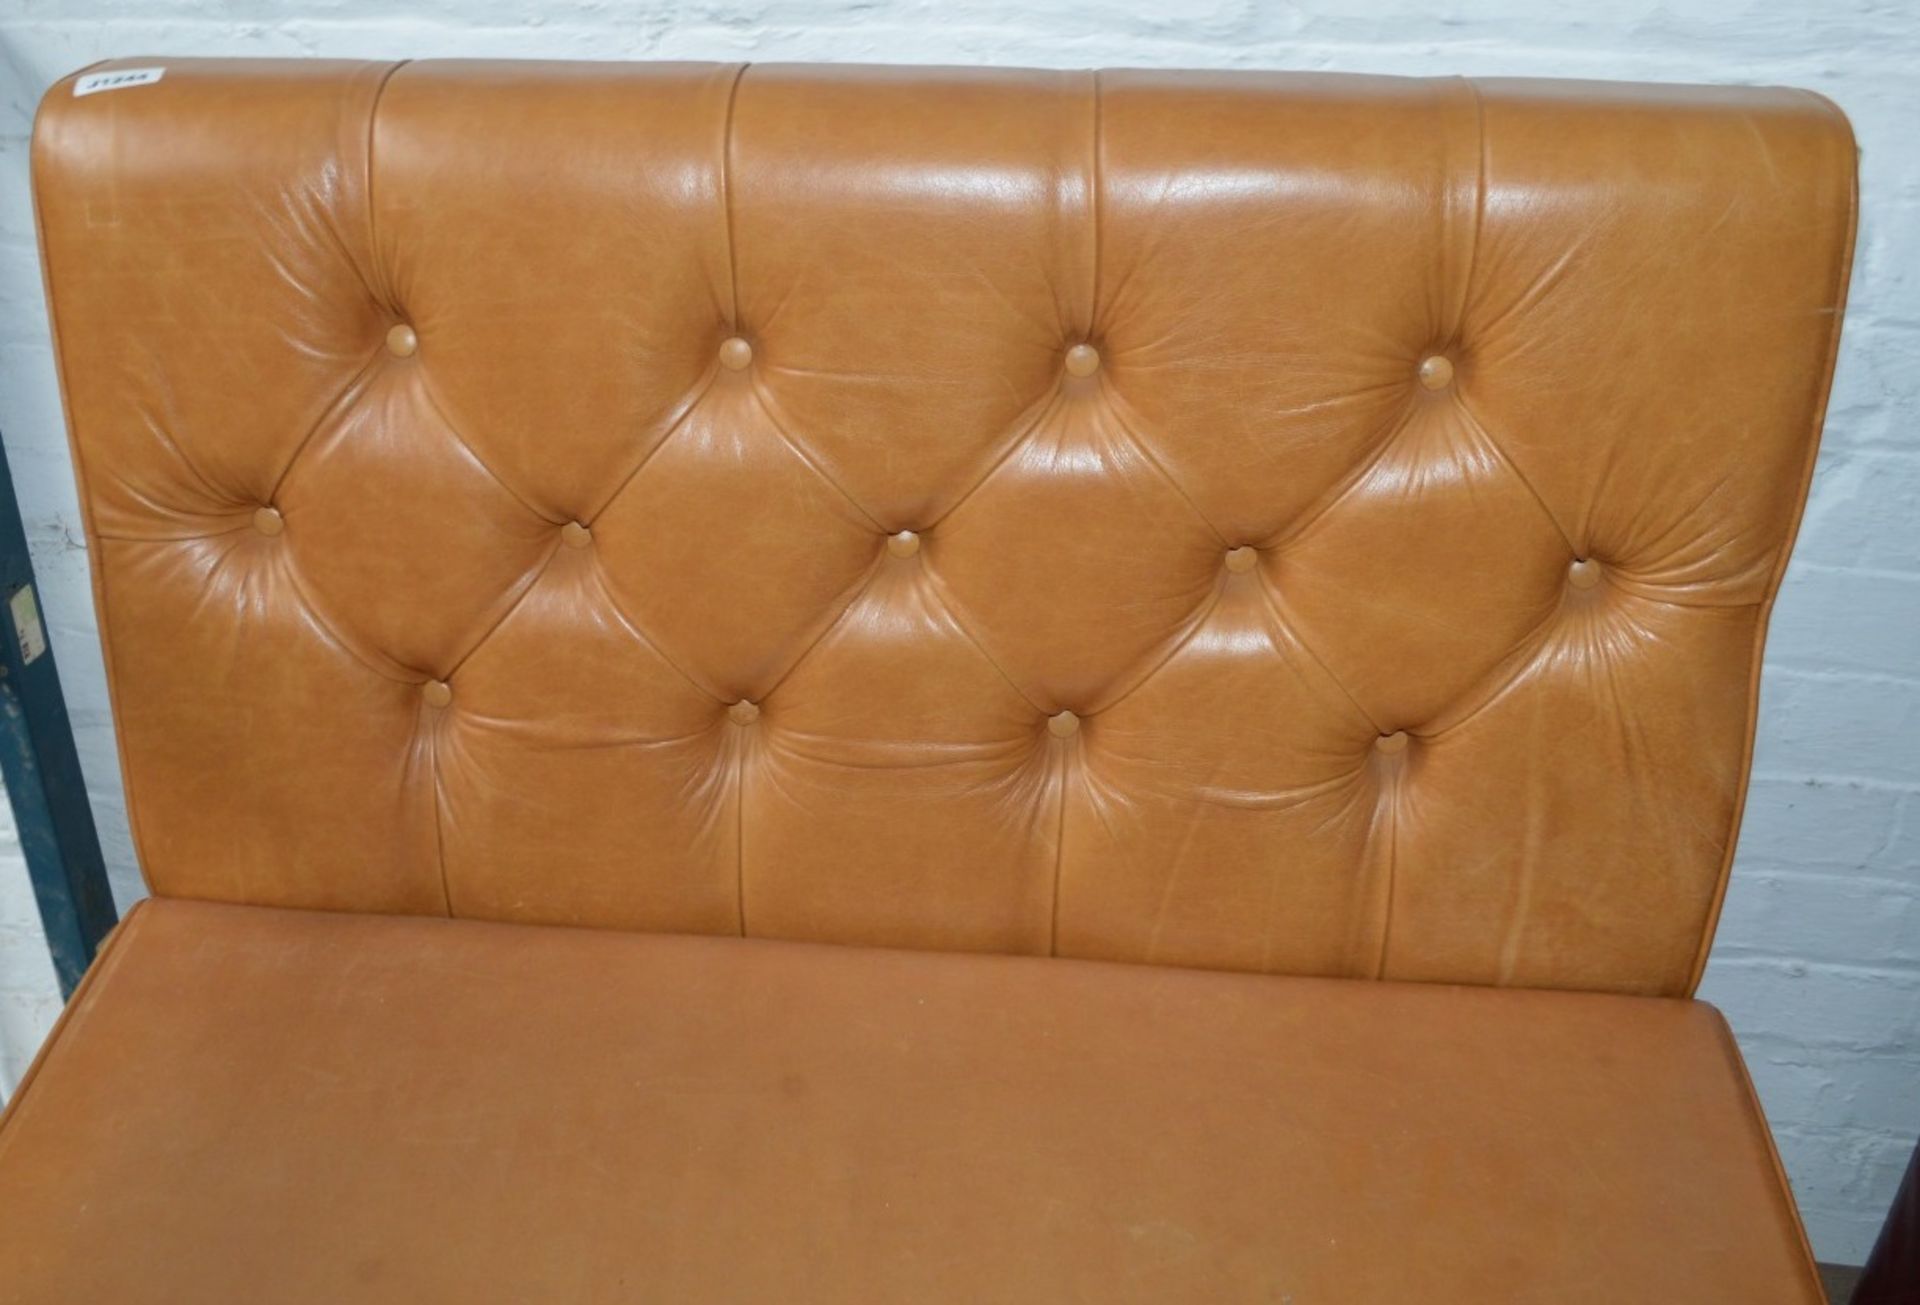 1 x Contemporary Seating Booth Section Upholstered In A Tan Coloured Leather - Image 4 of 9